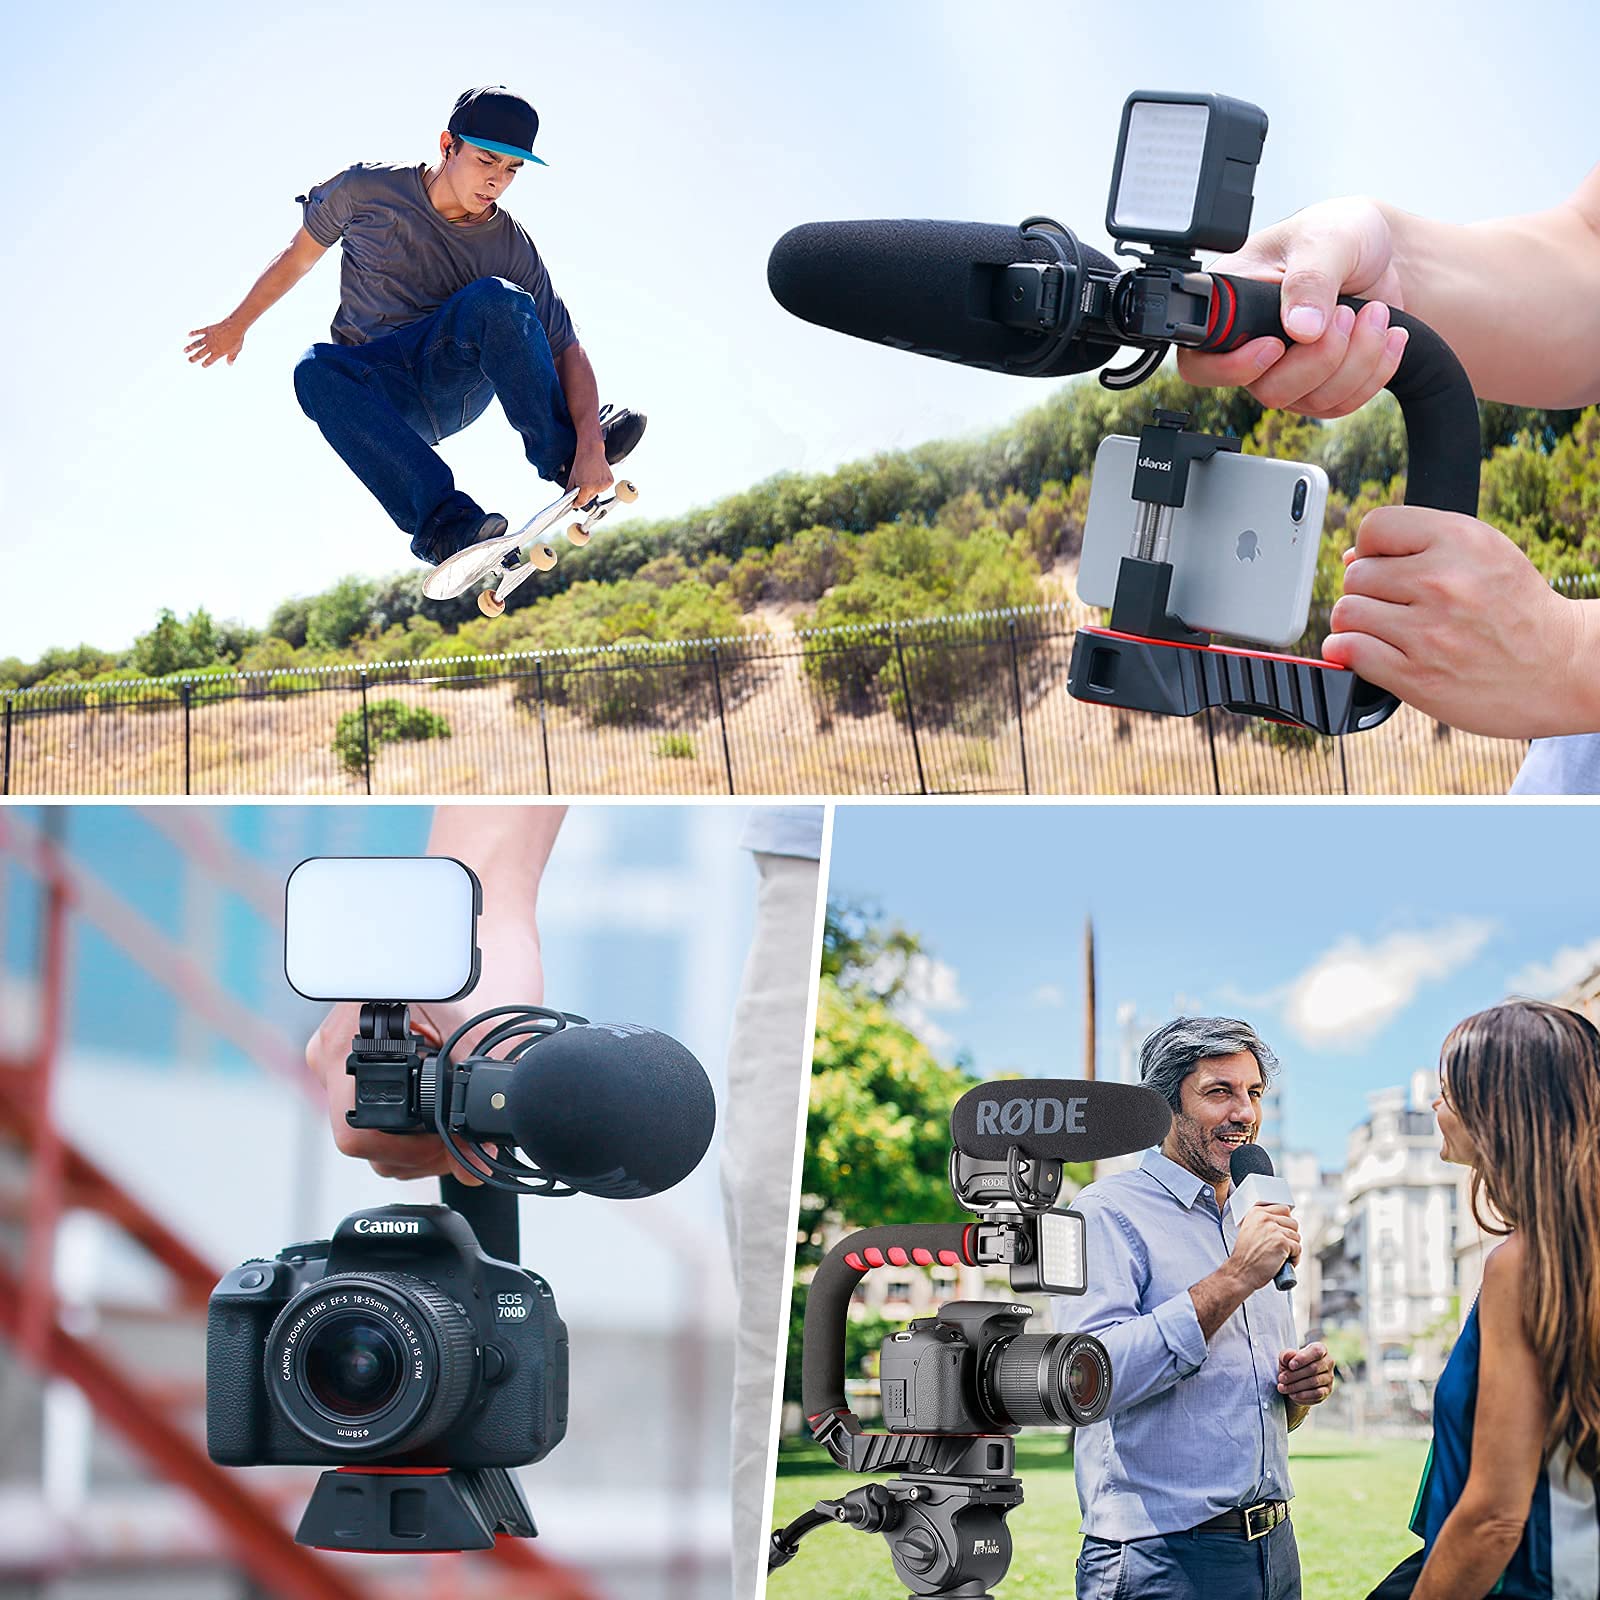 ULANZI U-Grip Pro Handheld Video Rig Steadicam with Triple Cold Shoe, Stabilizing Handle Grip Compatible for iPhone 13 12 Pro Max Xs 8 7 Plus GoPro 10 9 8 Canon Nikon Sony DSLR Cameras